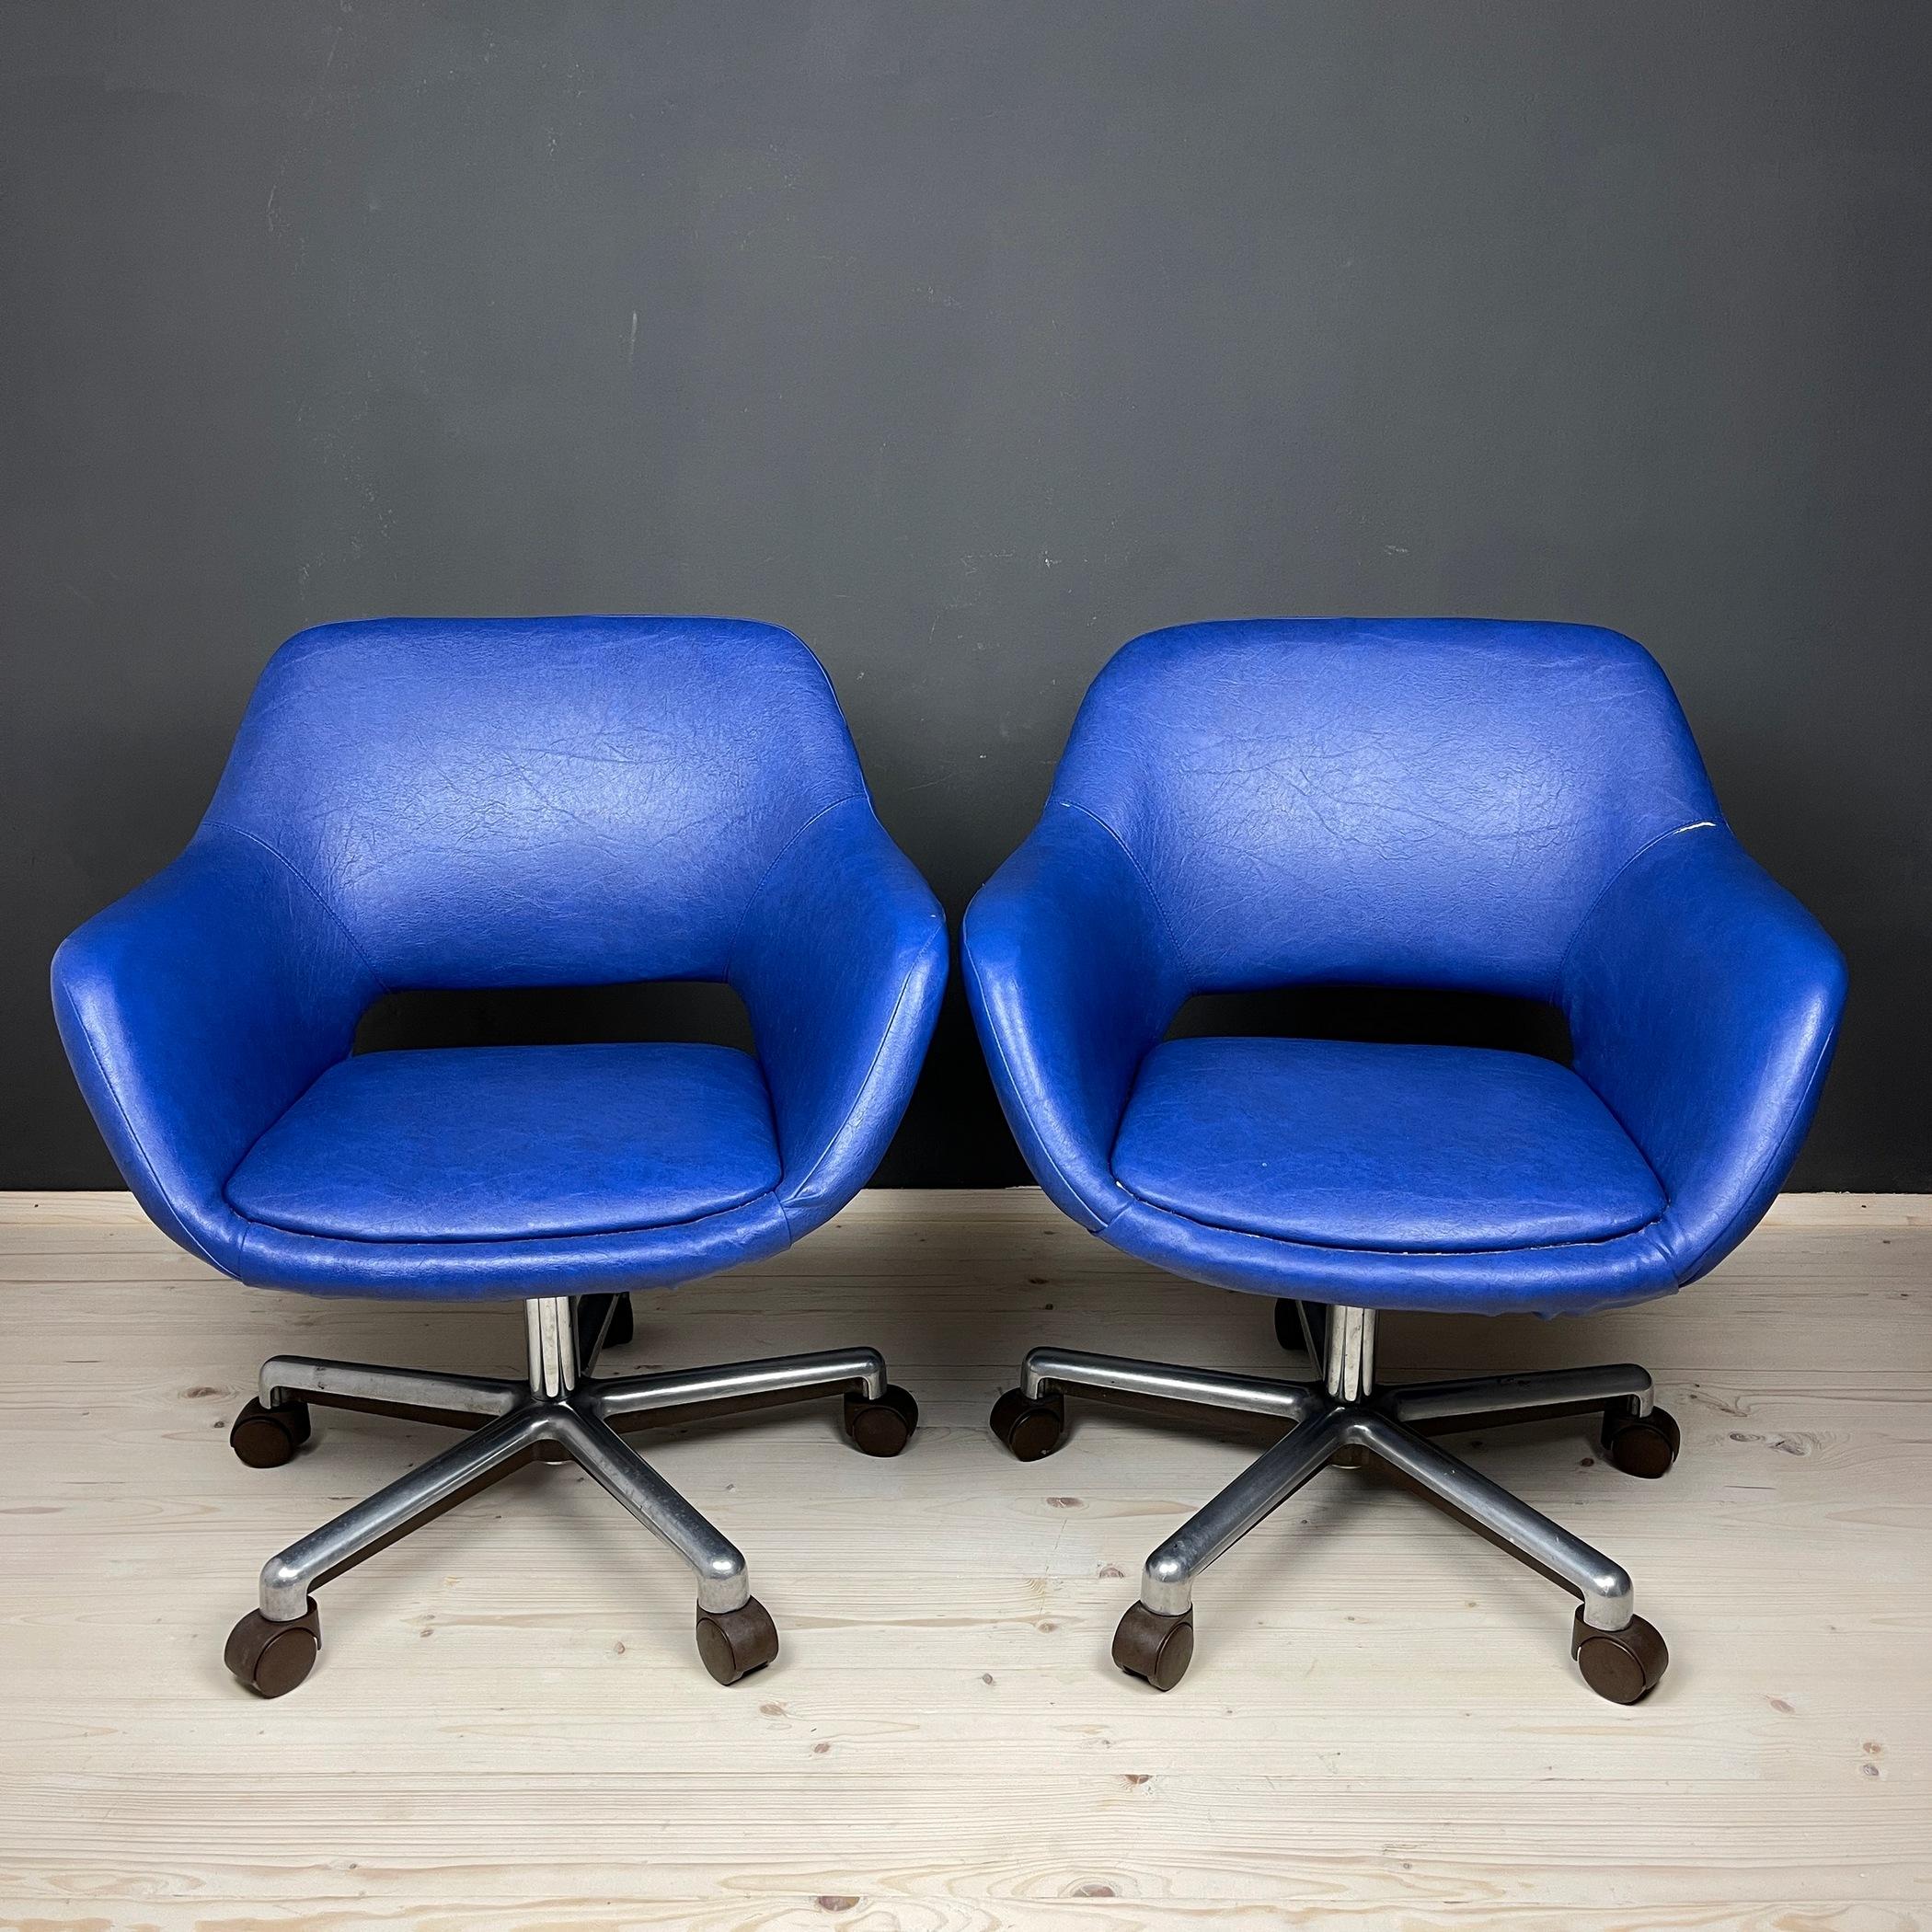 The pair of very comfortable office swivel chairs created in Yugoslavia in the 1980s in the manufacture Stol Kamnik.

Good vintage condition. There are traces of time and use. On one of the chairs, the leather parted at the seam.

Dimensions:
Width: